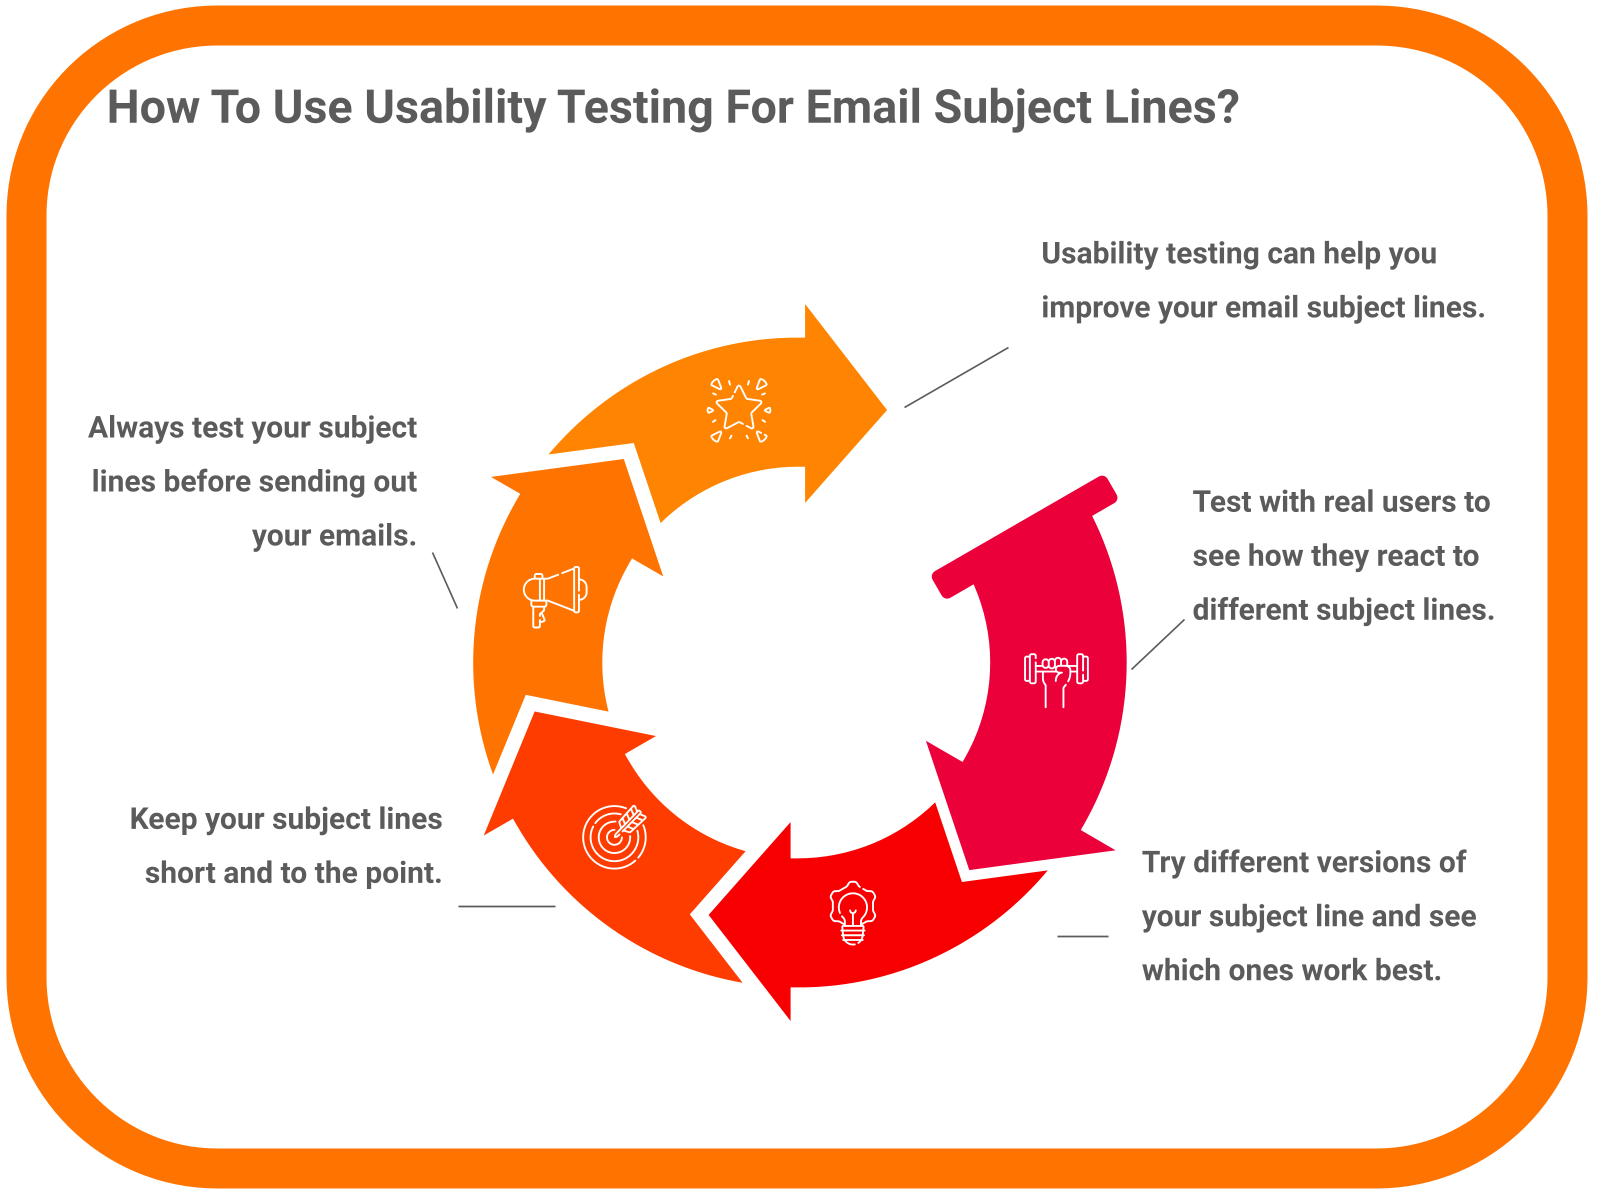 How To Use Usability Testing For Email Subject Lines?